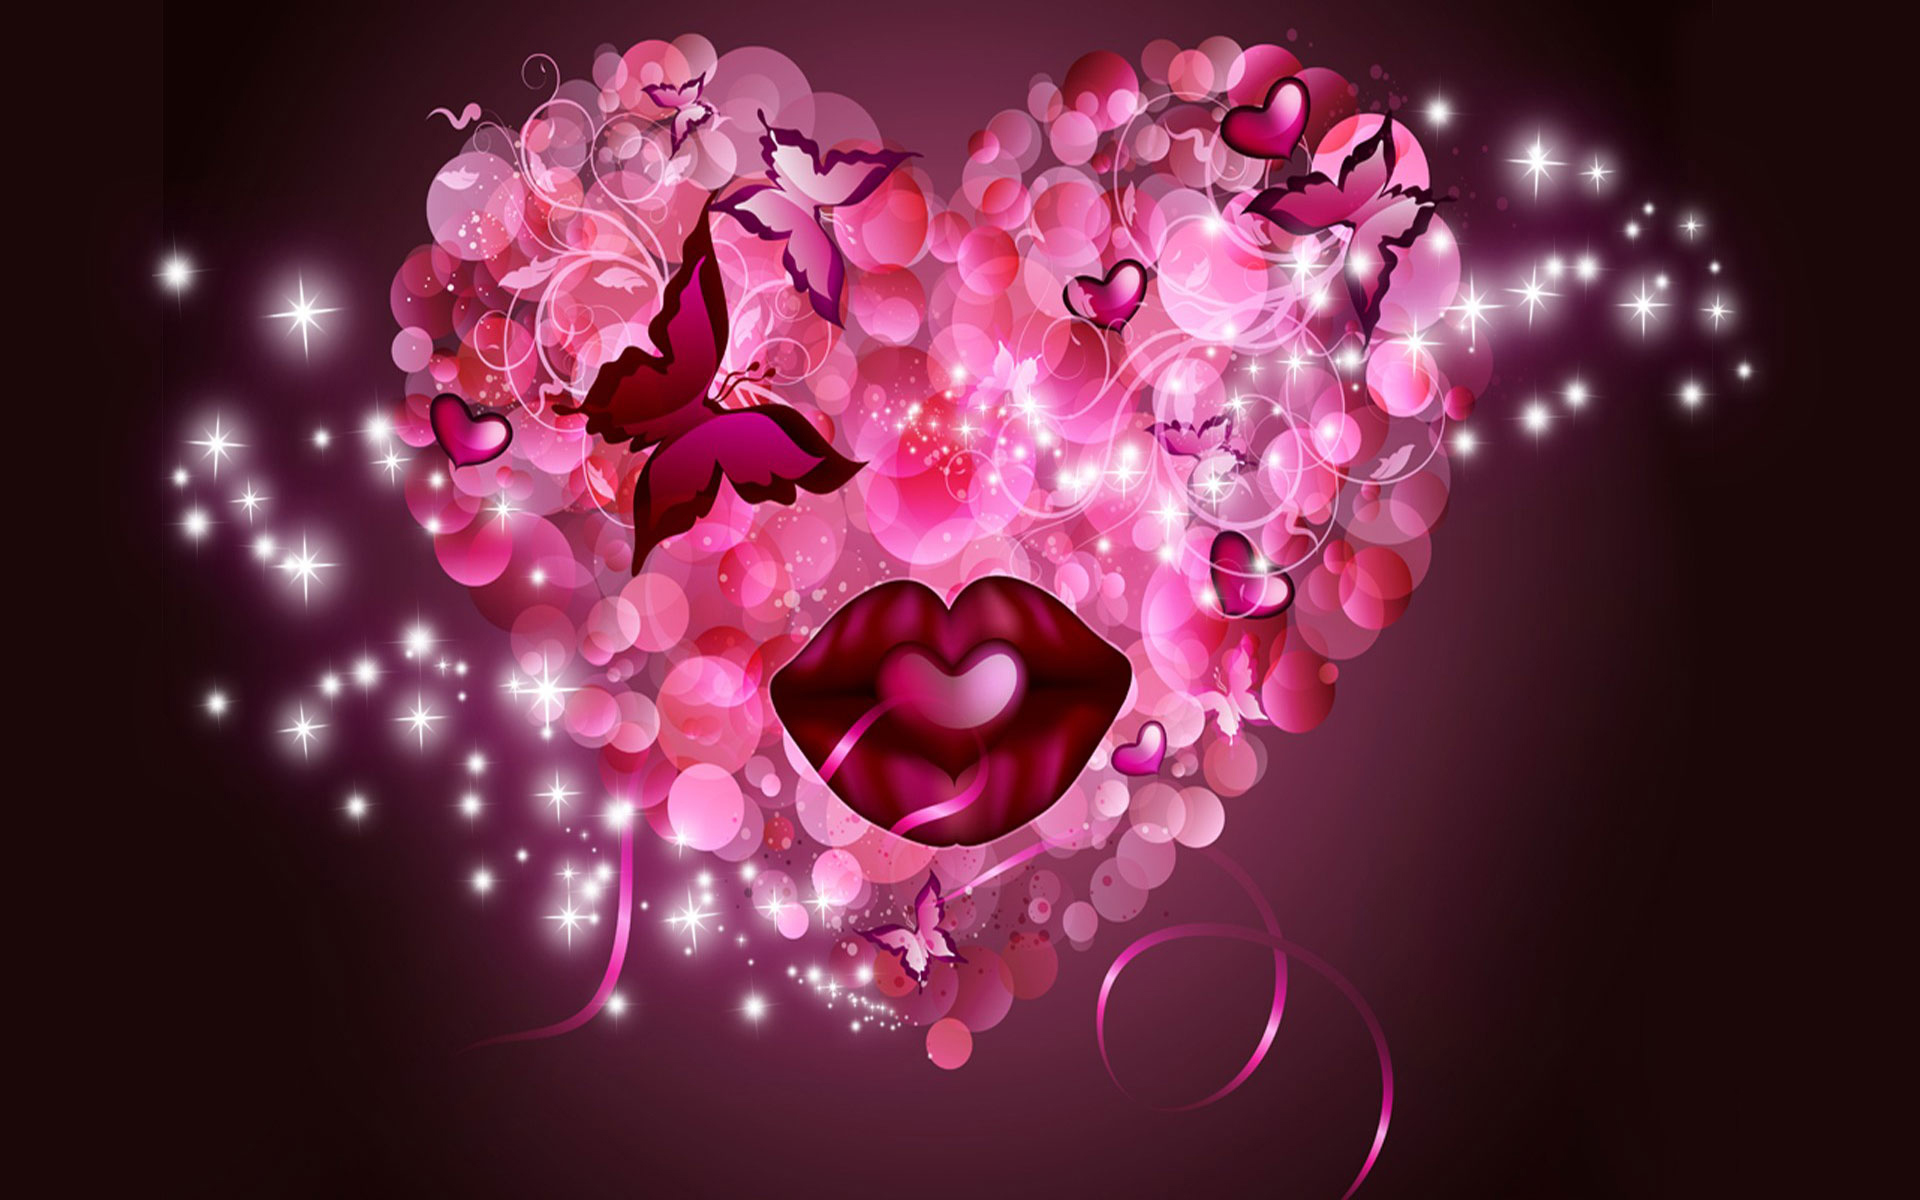 Beautiful Heart ImagesWallpapers